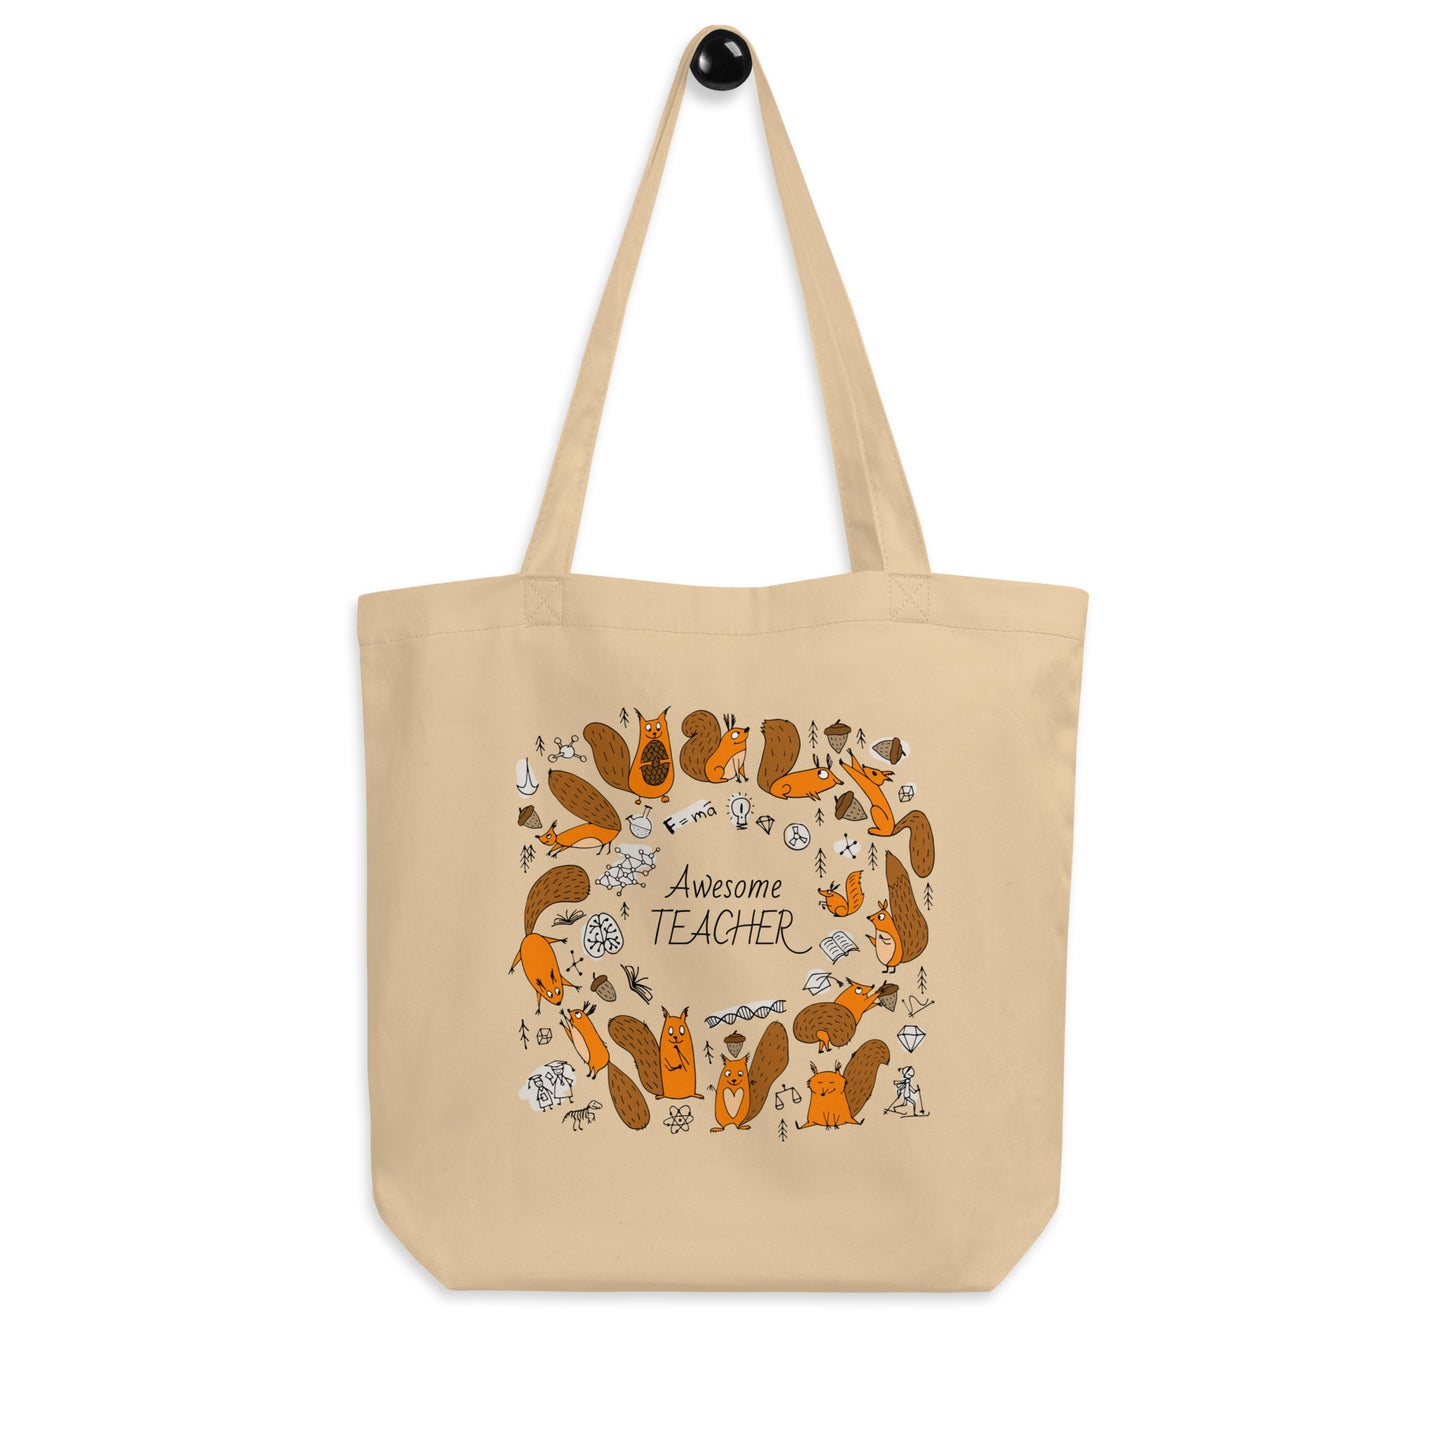 Science-themed eco tote bag with funny science squirrels